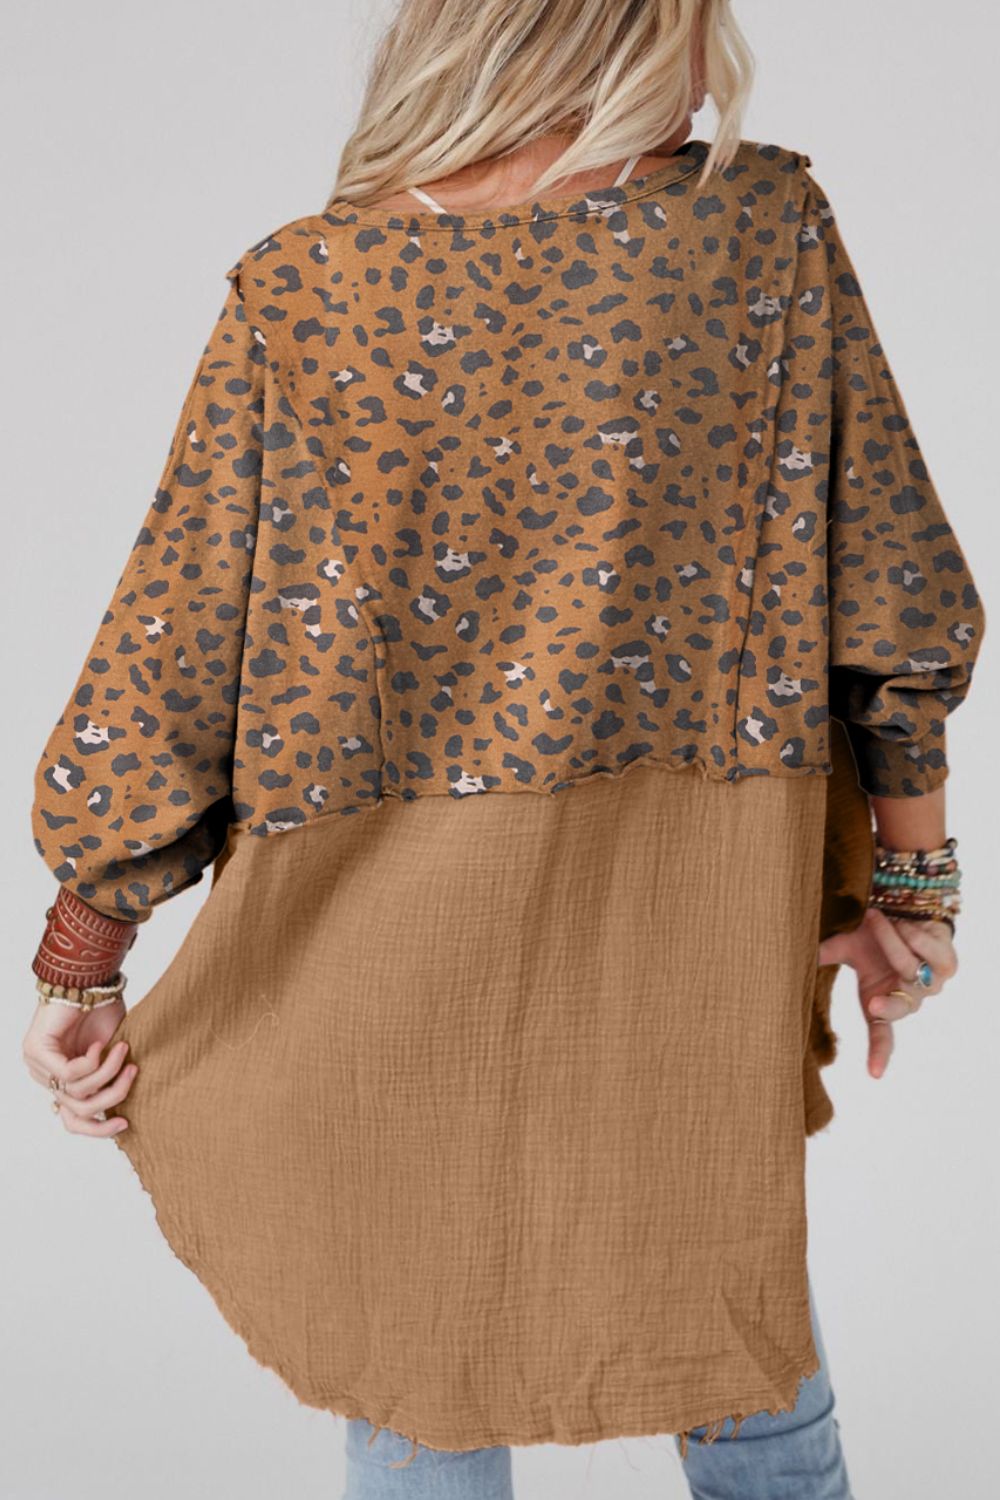 Textured Leopard Dropped Shoulder Blouse - Women’s Clothing & Accessories - Shirts & Tops - 5 - 2024